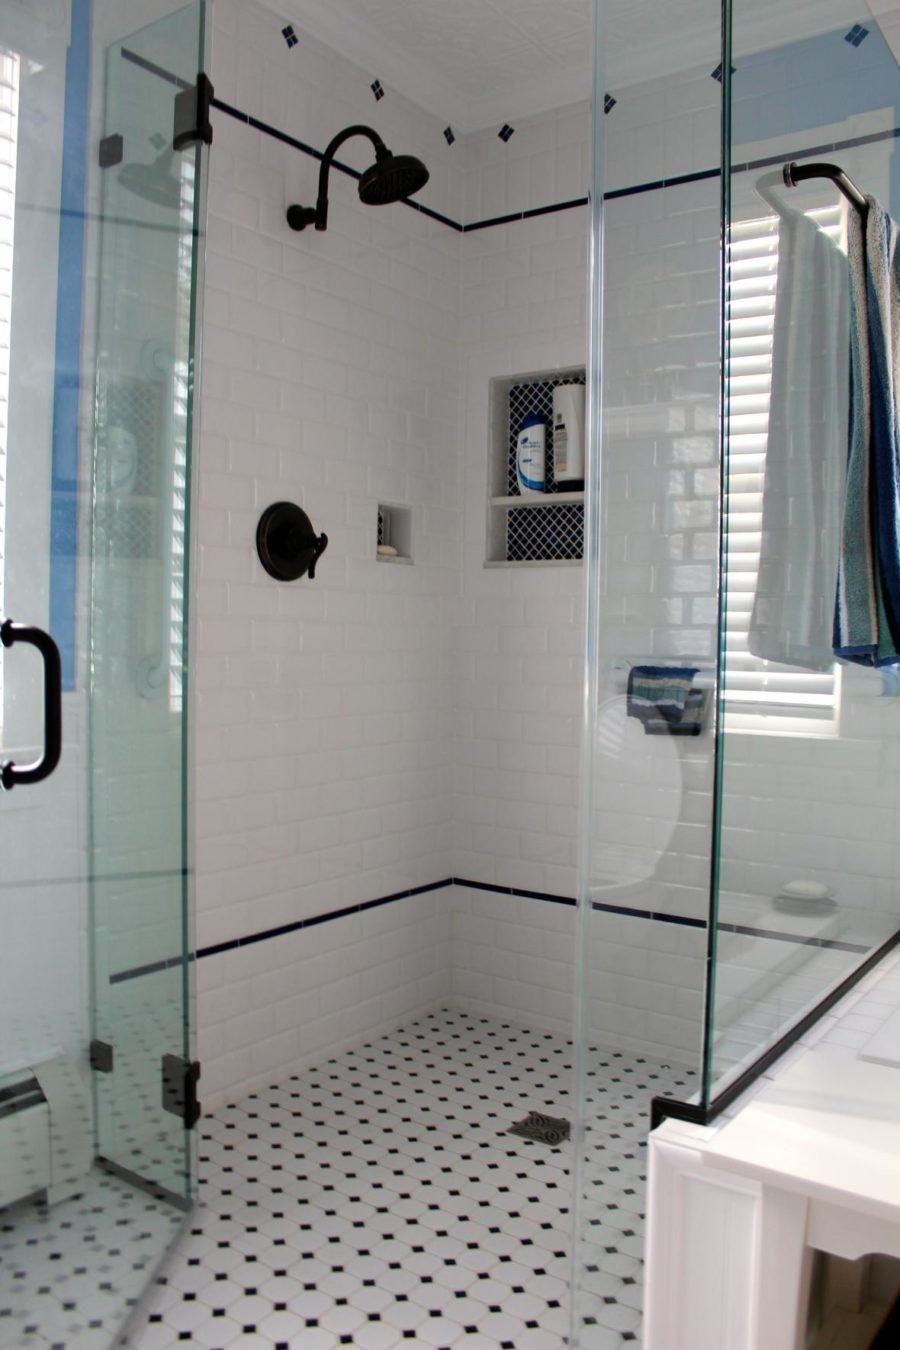 White Tile Bathroom Shower
 15 Tile Showers To Fashion Your Revamp After